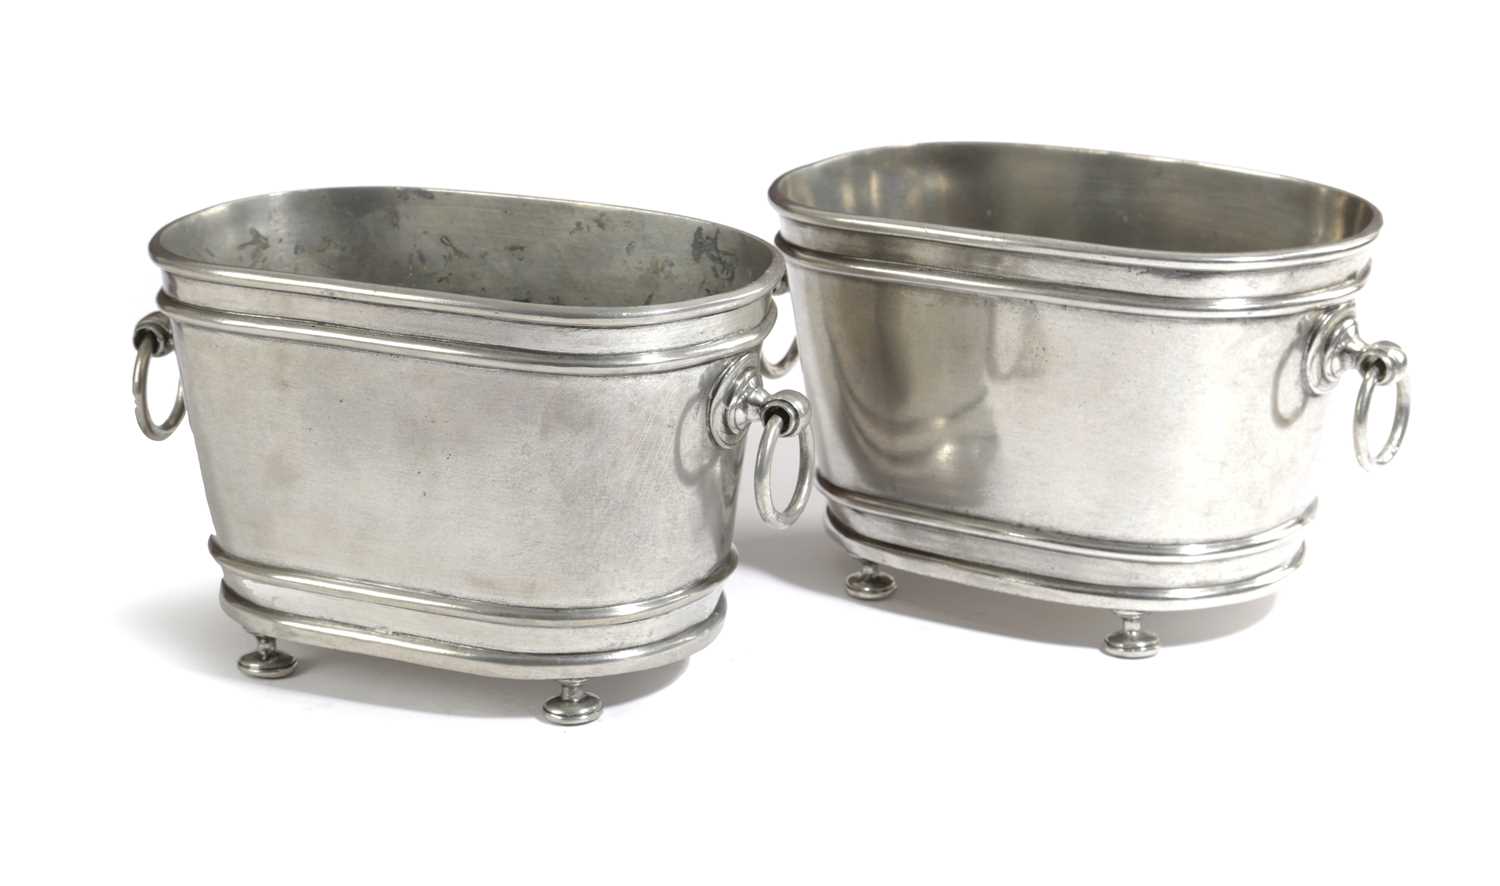 A PAIR OF FRENCH POLISHED STEEL JARDINIERES OR WINE COOLERS EARLY 20TH CENTURY of oval form with